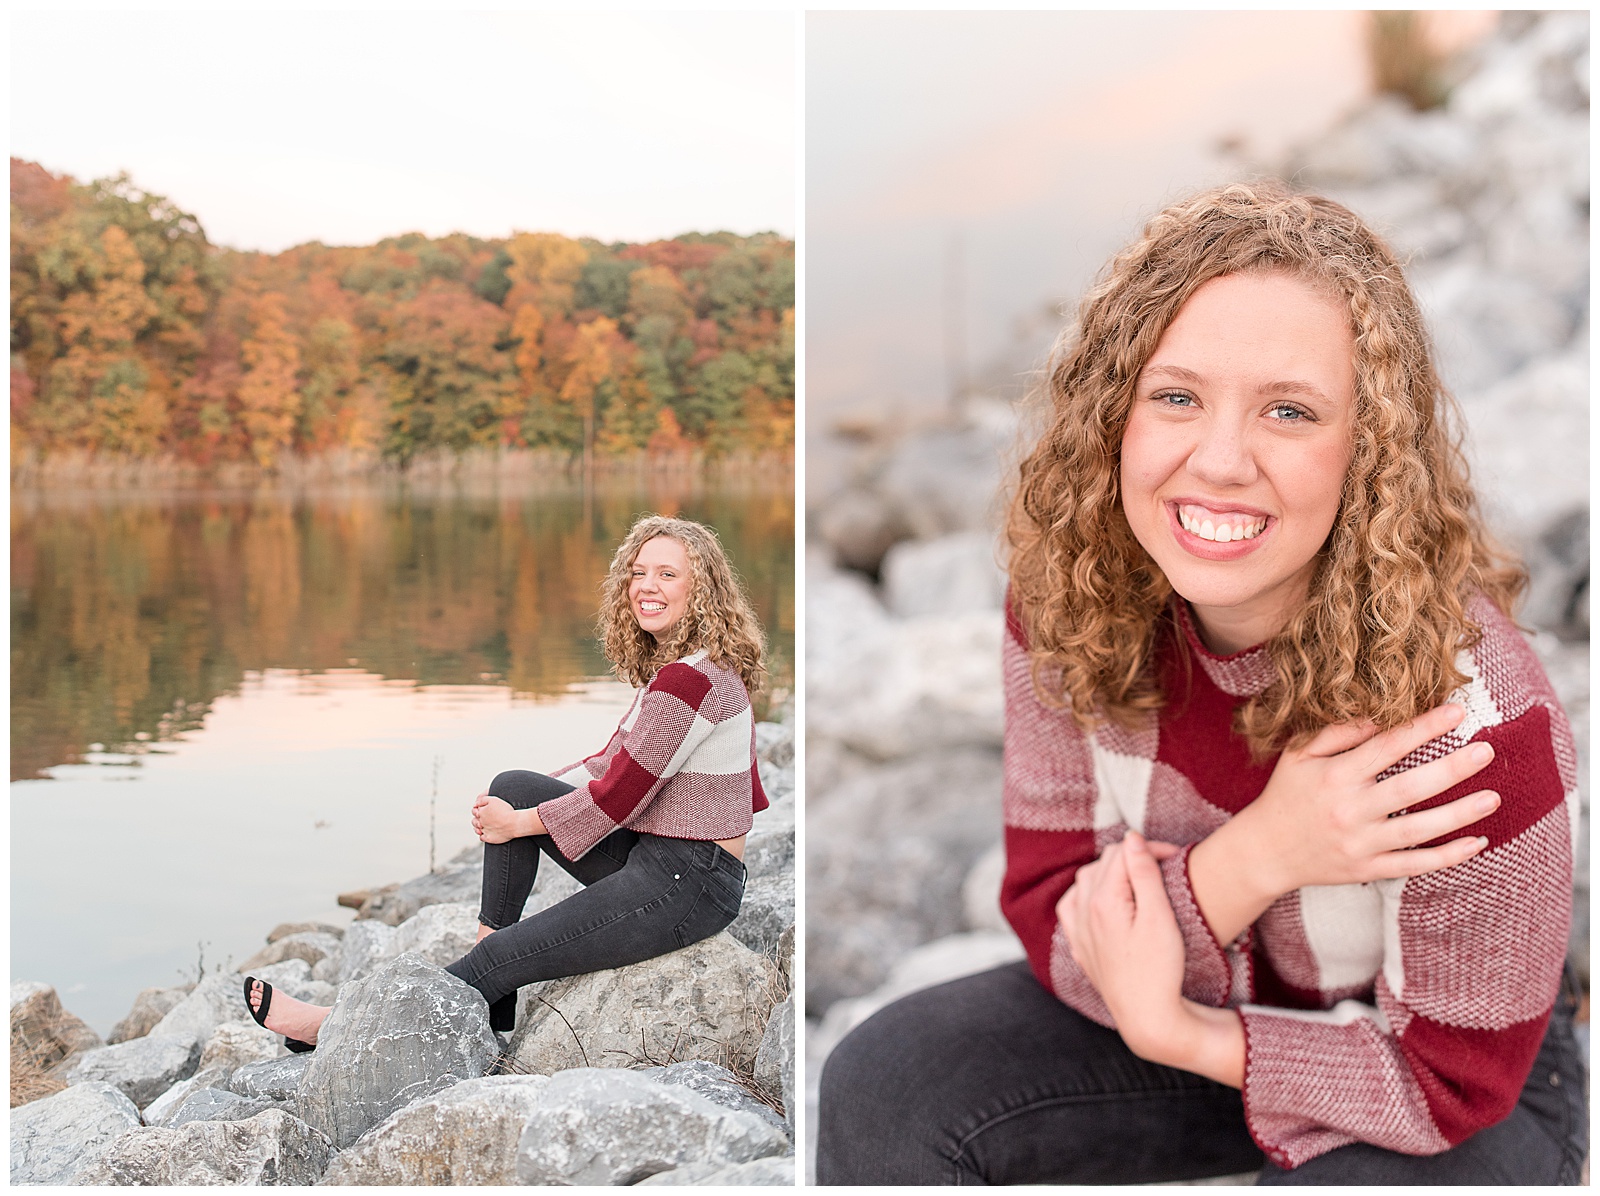 senior girl in maroon and black outfit on large rocks by lake on fall day